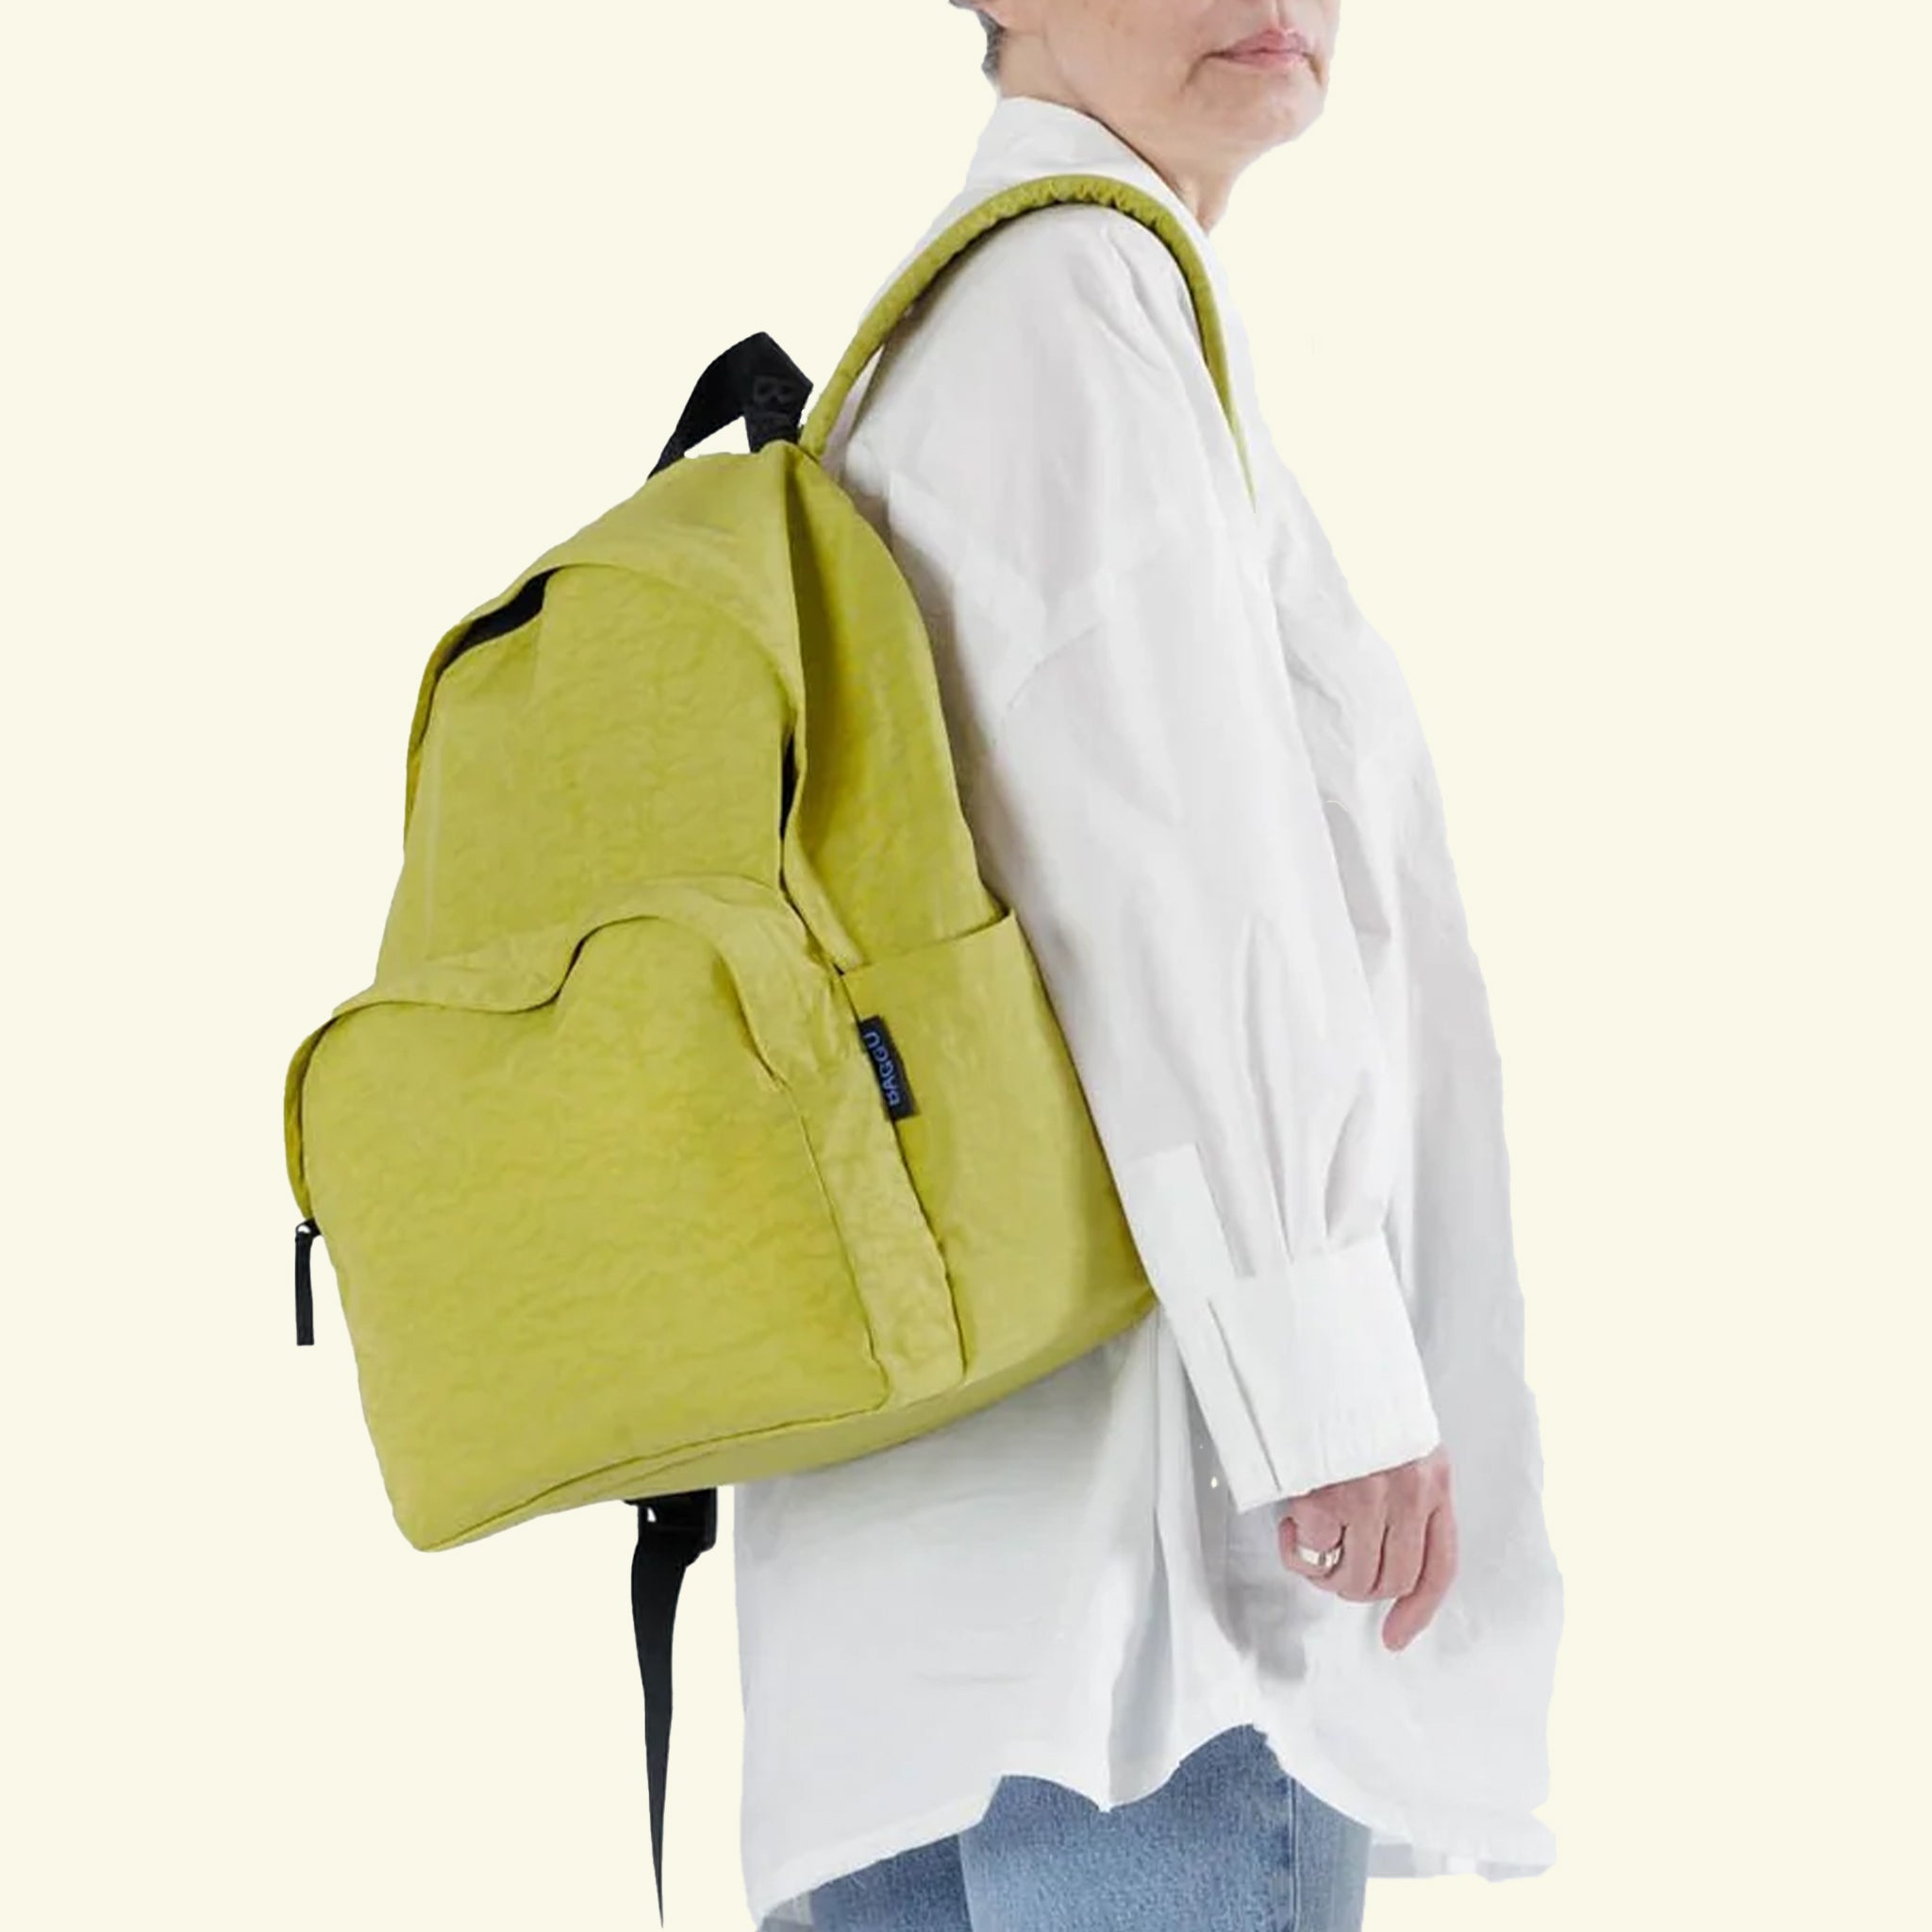 A lemongrass green nylon backpack with front pockets and black details.